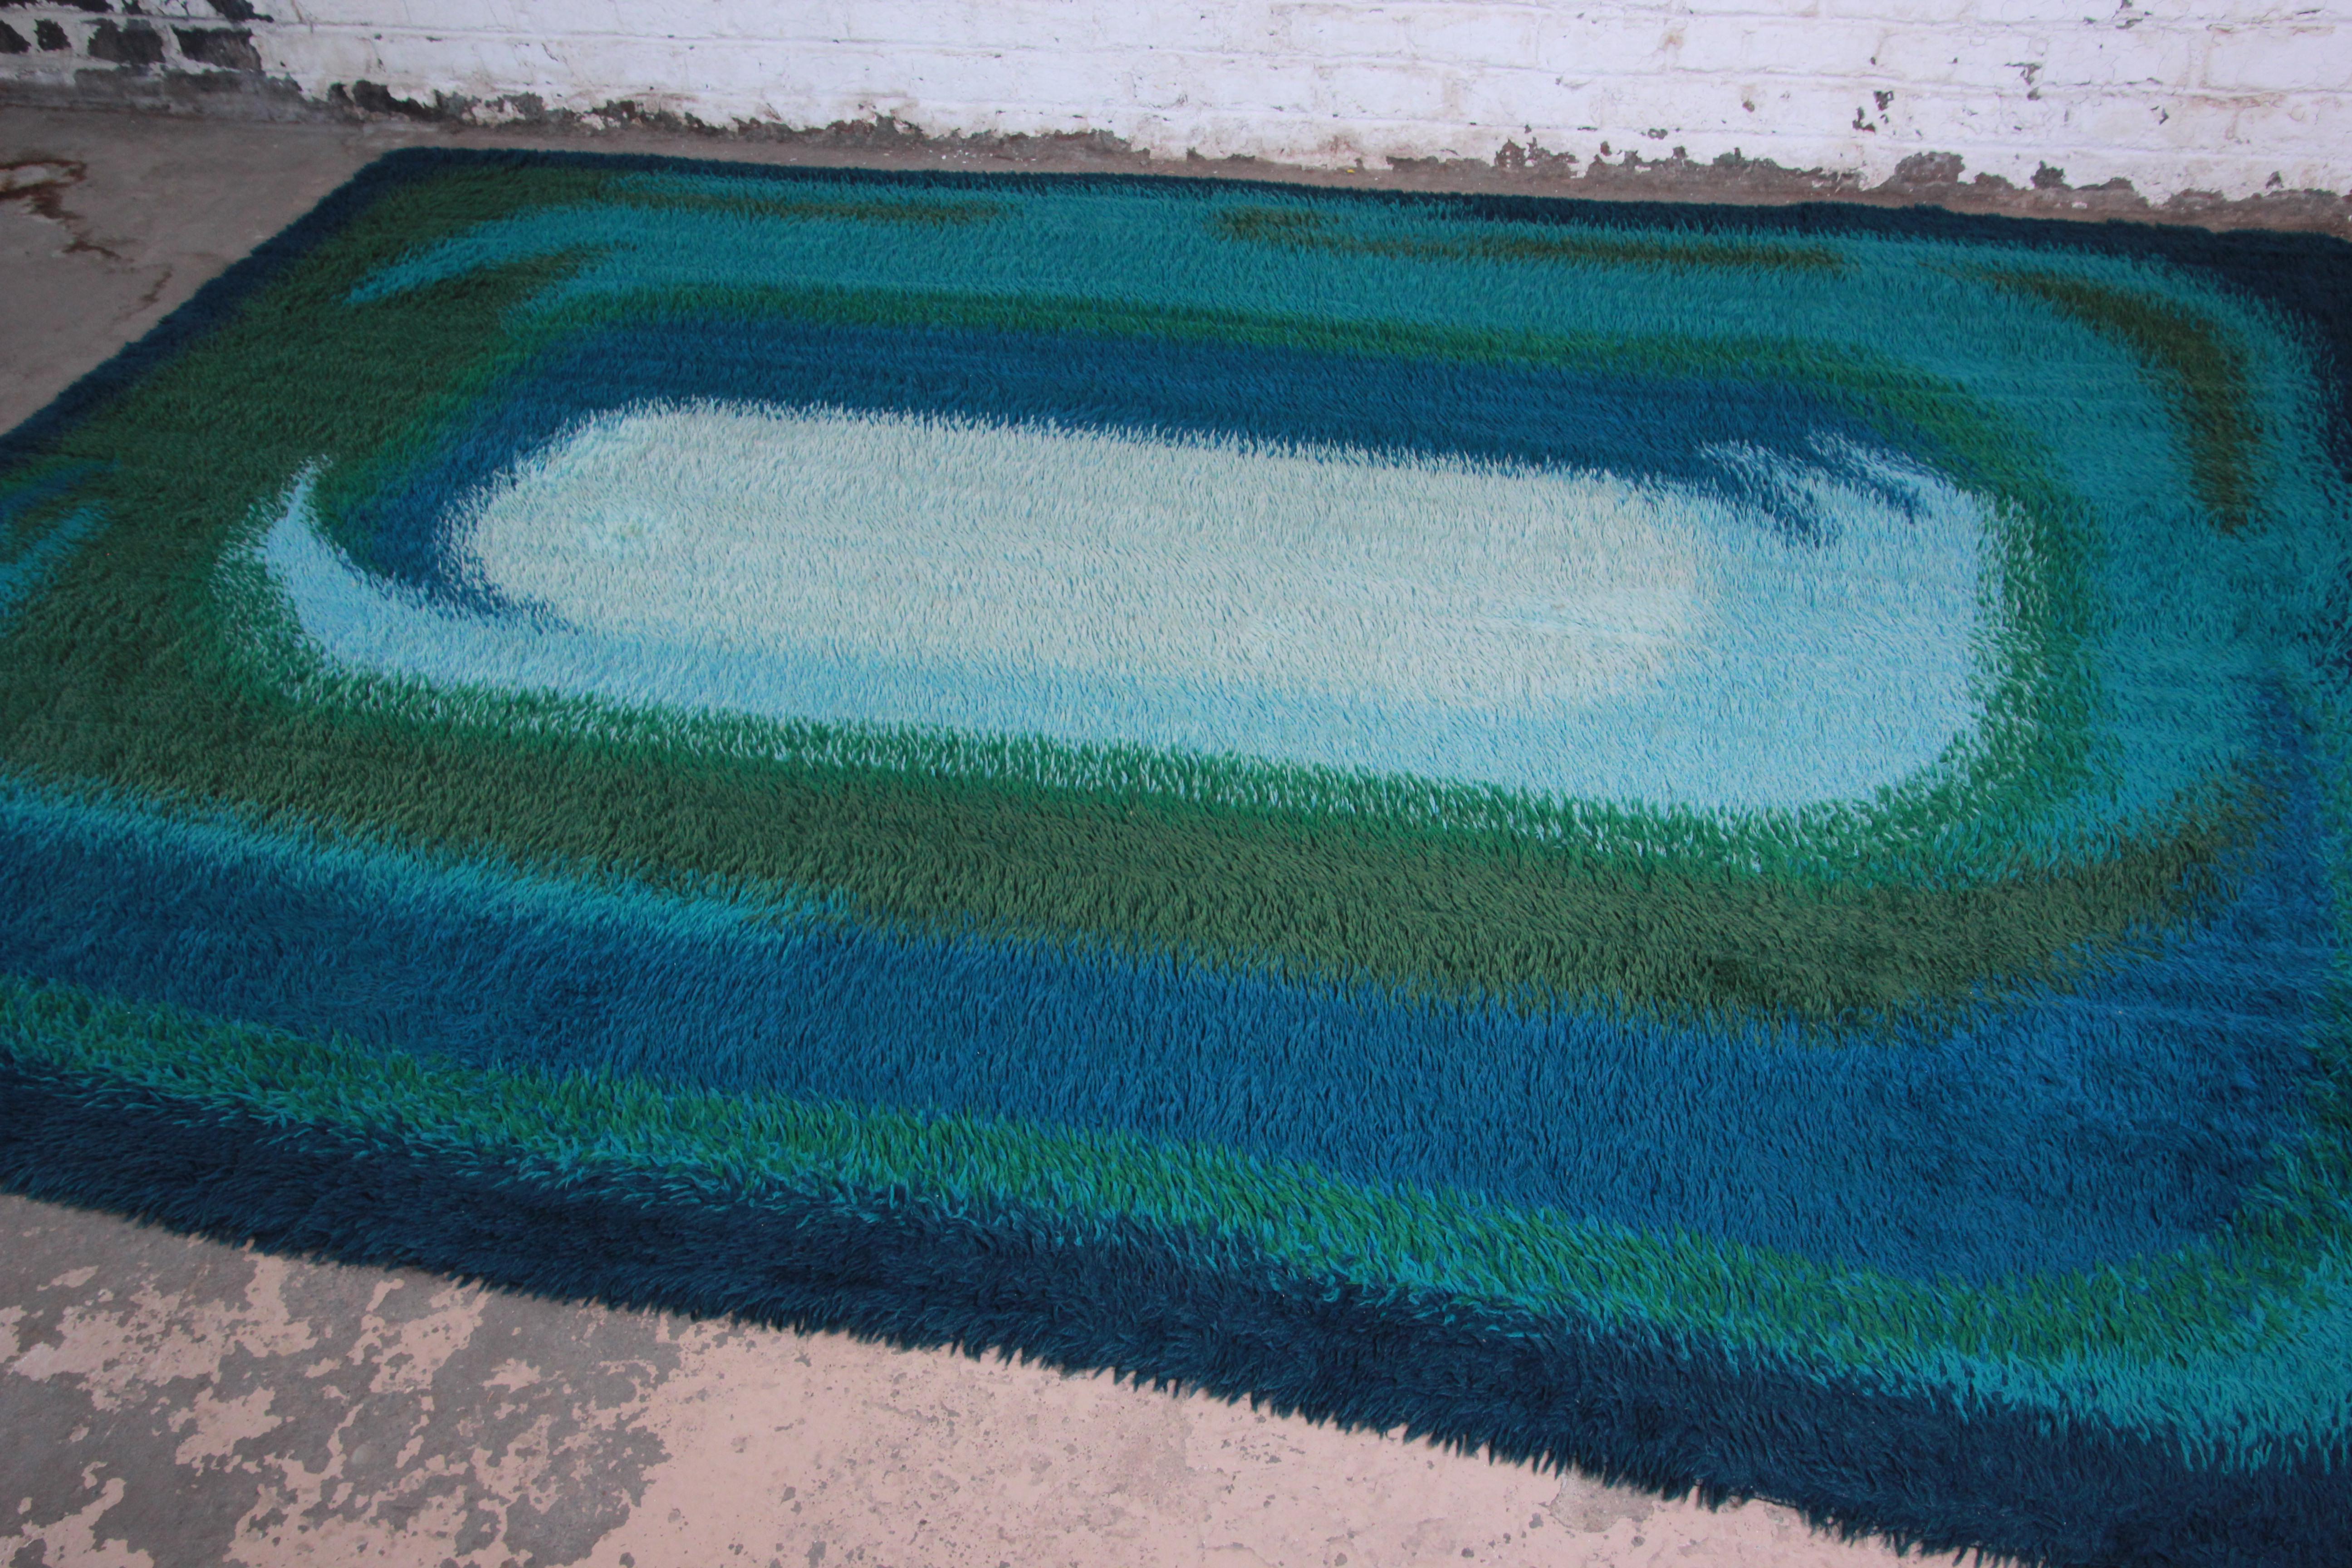 Offering a stunning midcentury Danish modern rya shag rug. The rug has a unique abstract design in vivid colors of blue, teal, and green. It has a thick, soft wool pile throughout. A very nice and clean rug for any modern or Mid-Century Modern